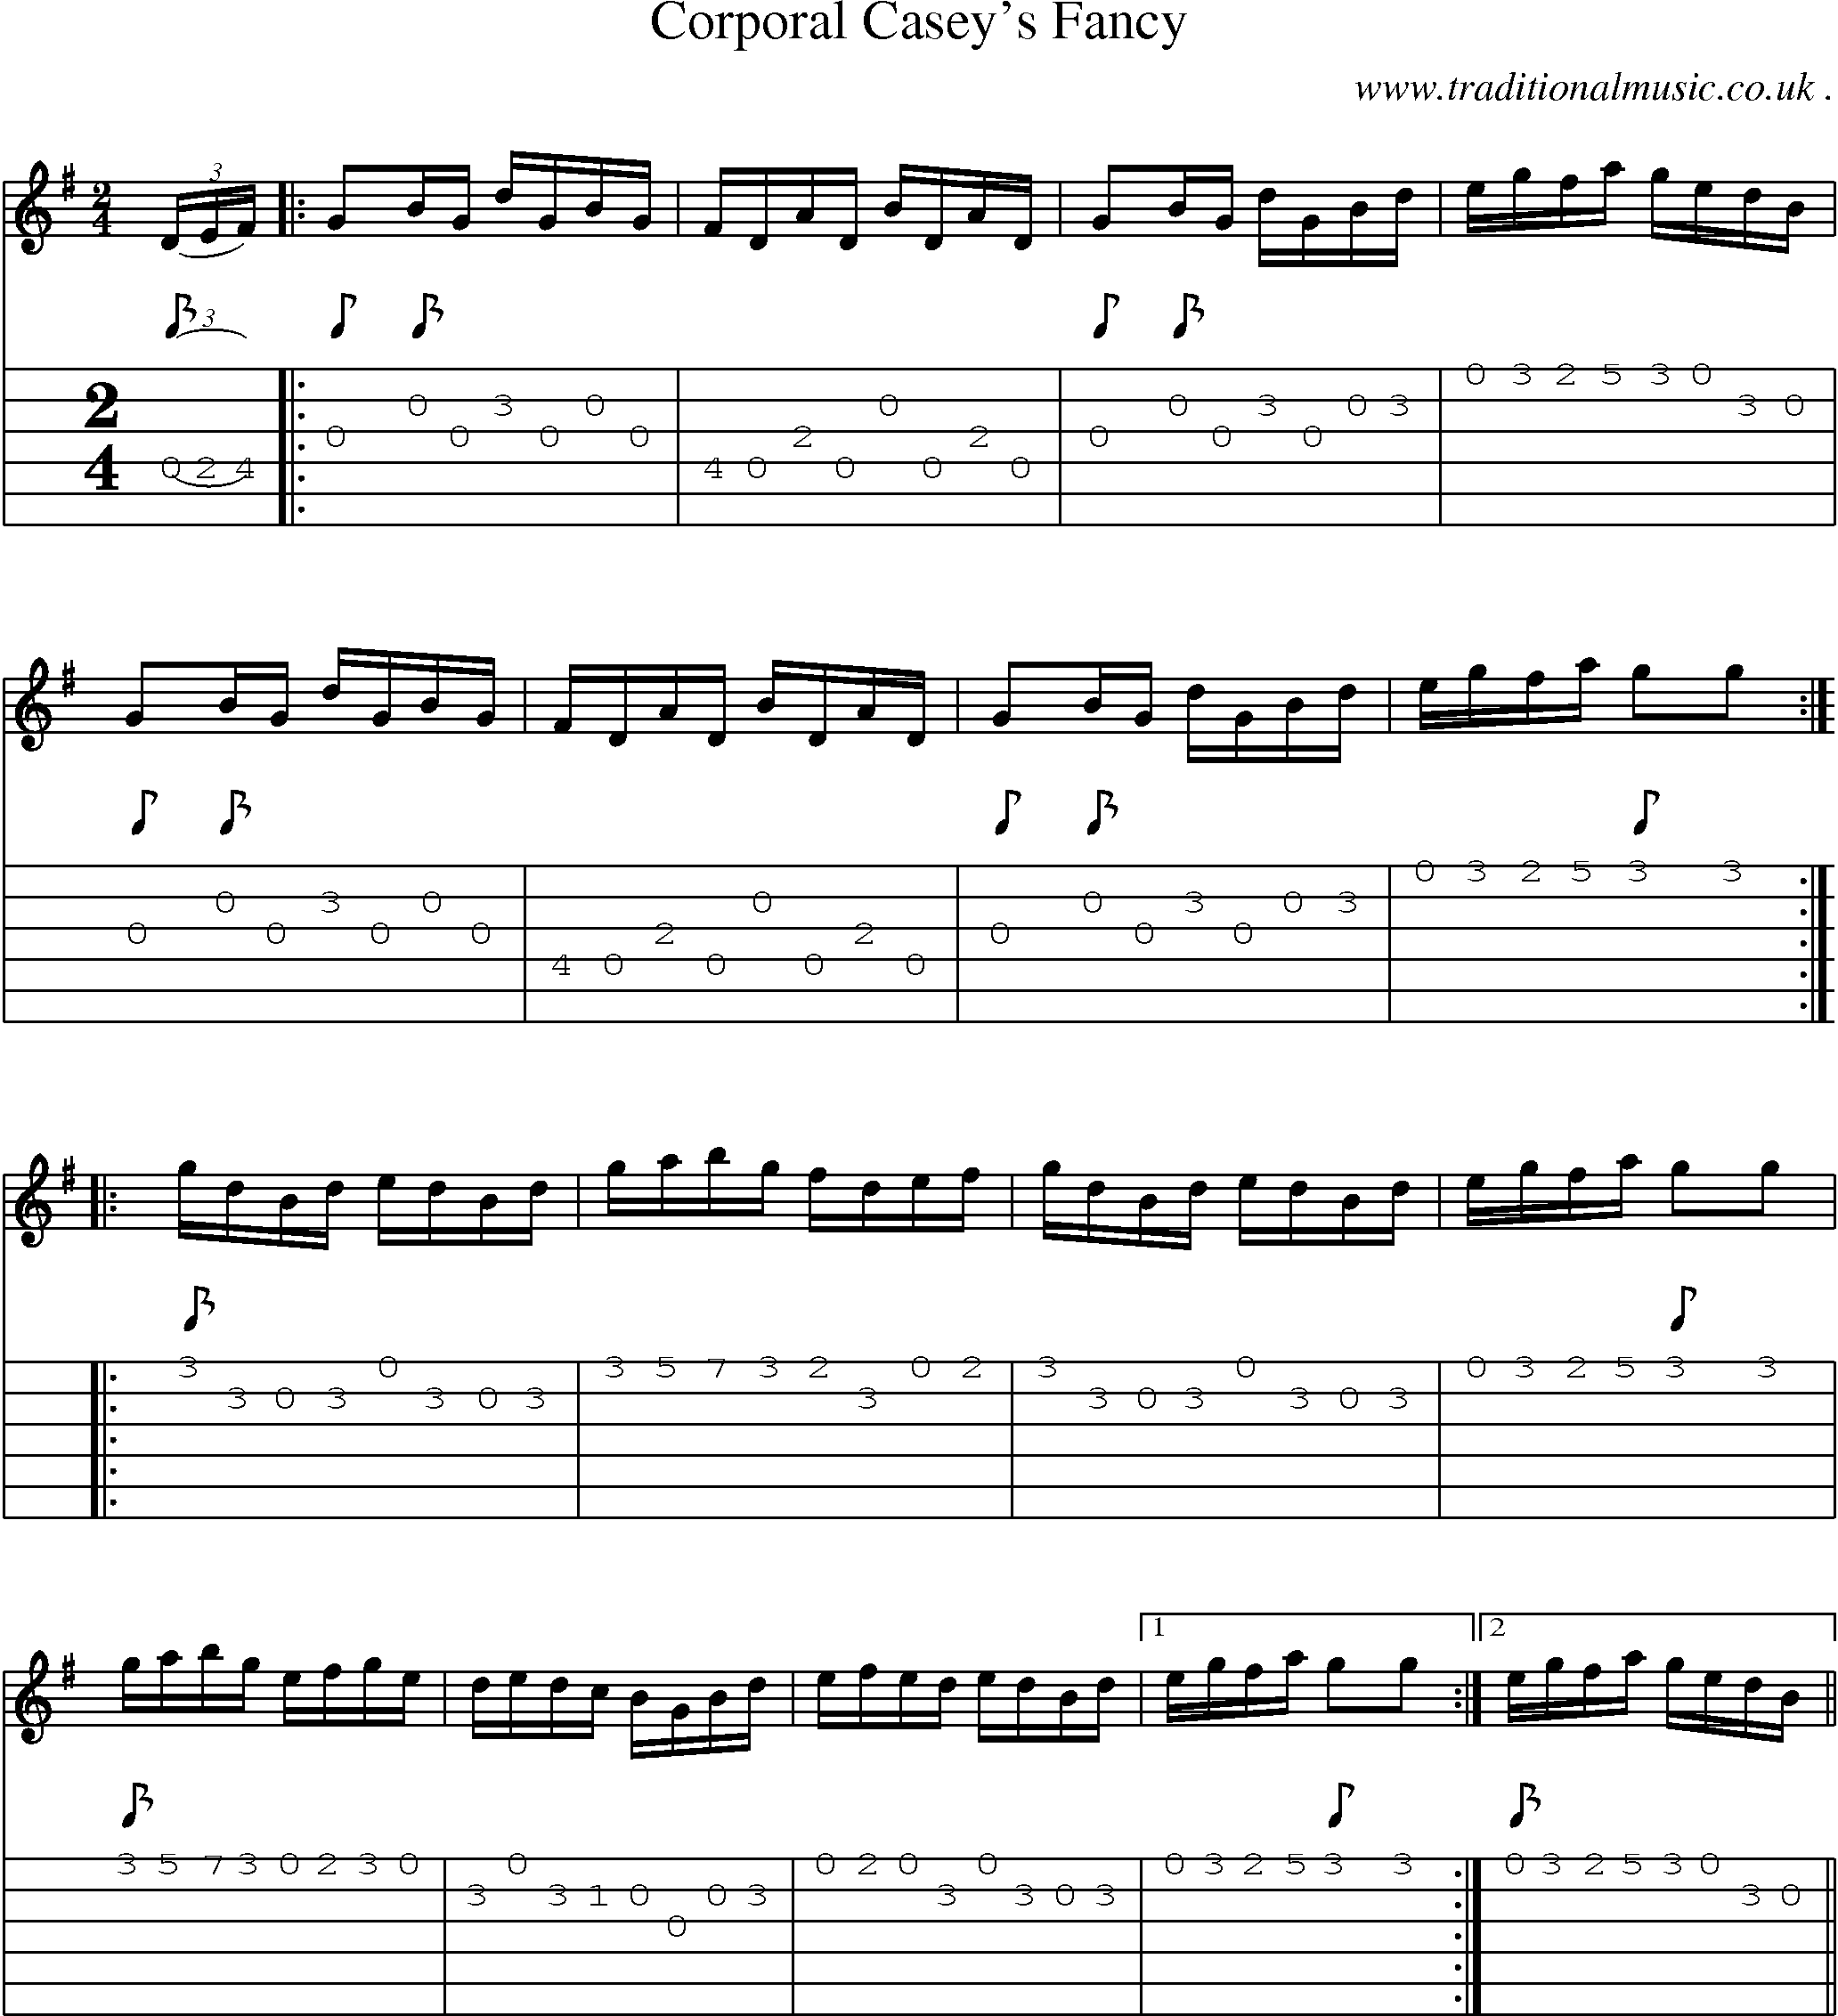 Sheet-Music and Guitar Tabs for Corporal Caseys Fancy